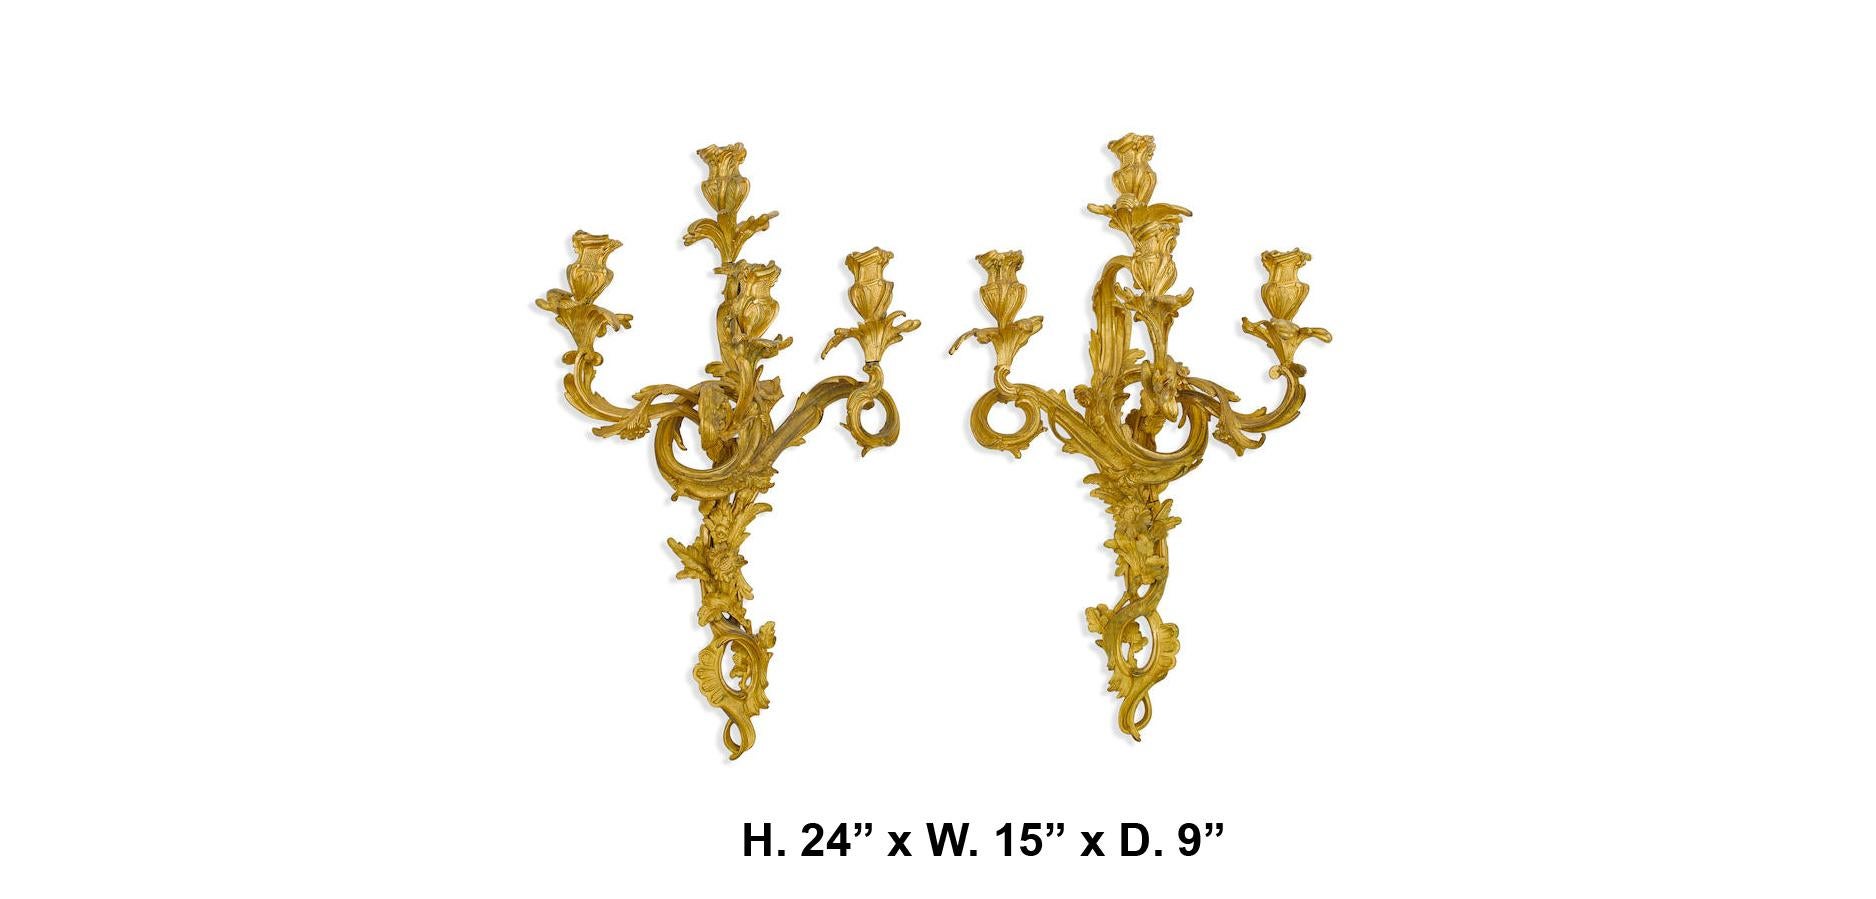 Apposing pair of 19 century French Louis XV style ormolu three light sconces with meticulous attention given to every detail of the rocaille and acanthus motif

Measures: height 24in, width 15in, depth 9in.